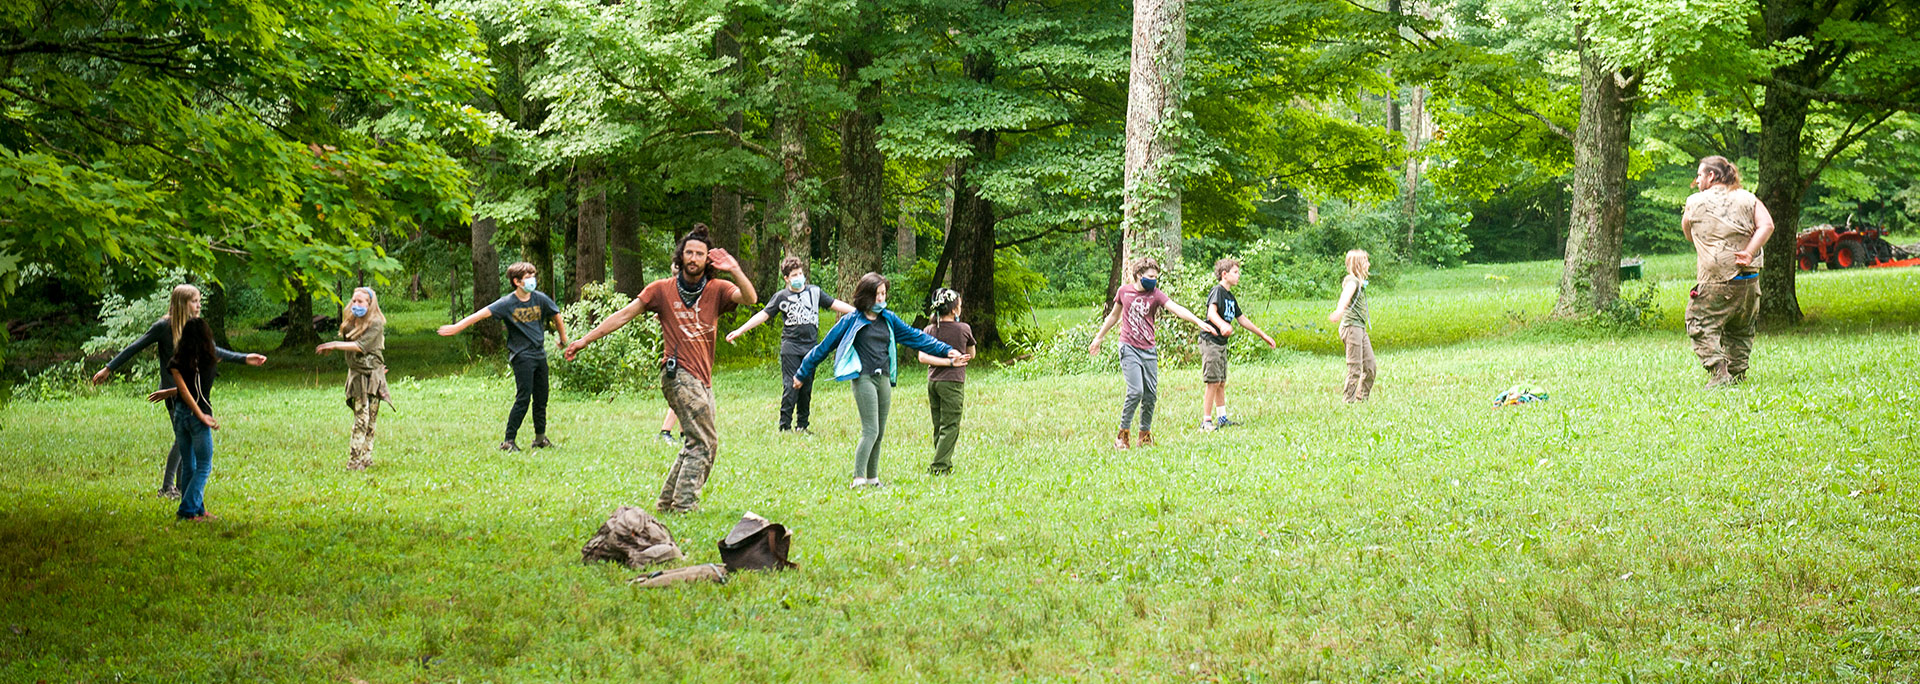 Homeschoolers at nature camp learn "Jedi" skills with martial arts and meditation training